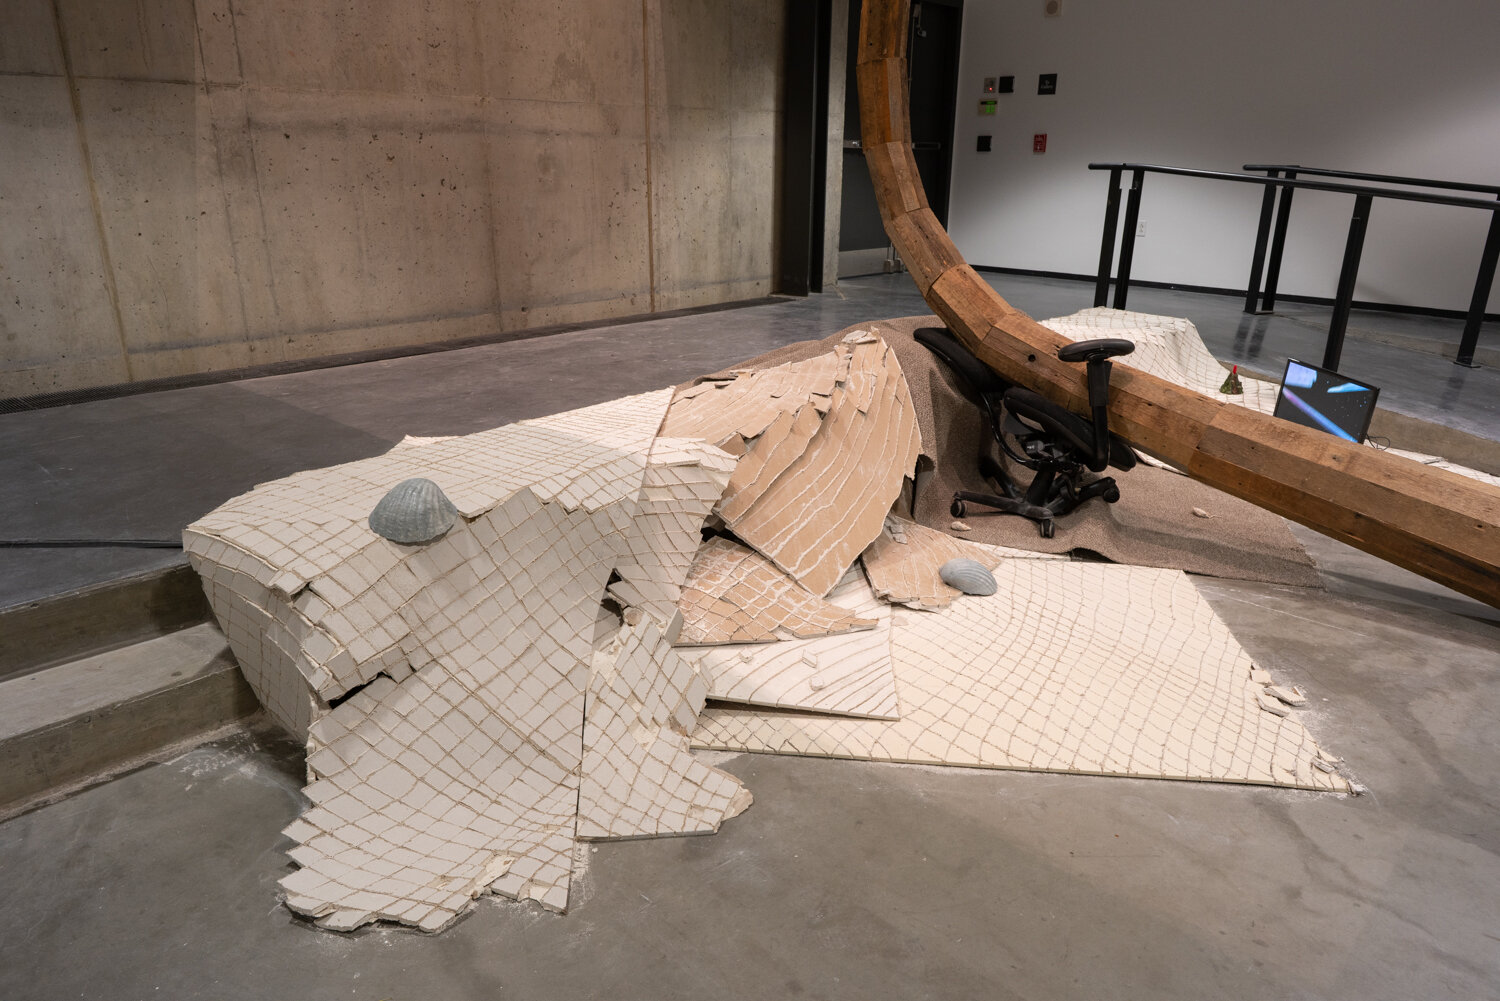  Alex Zak  Swamped , 2019 Sheet rock, plaster wrap, carpet, wood, steel, aluminum, paint, cement, sand, oven-bake clay,   office chair, modified ceiling fan, Monitor, Keyboard, aquarium volcano, red sharpie 192 x 204 x 196 inches (488 x 305 x 498 cm)